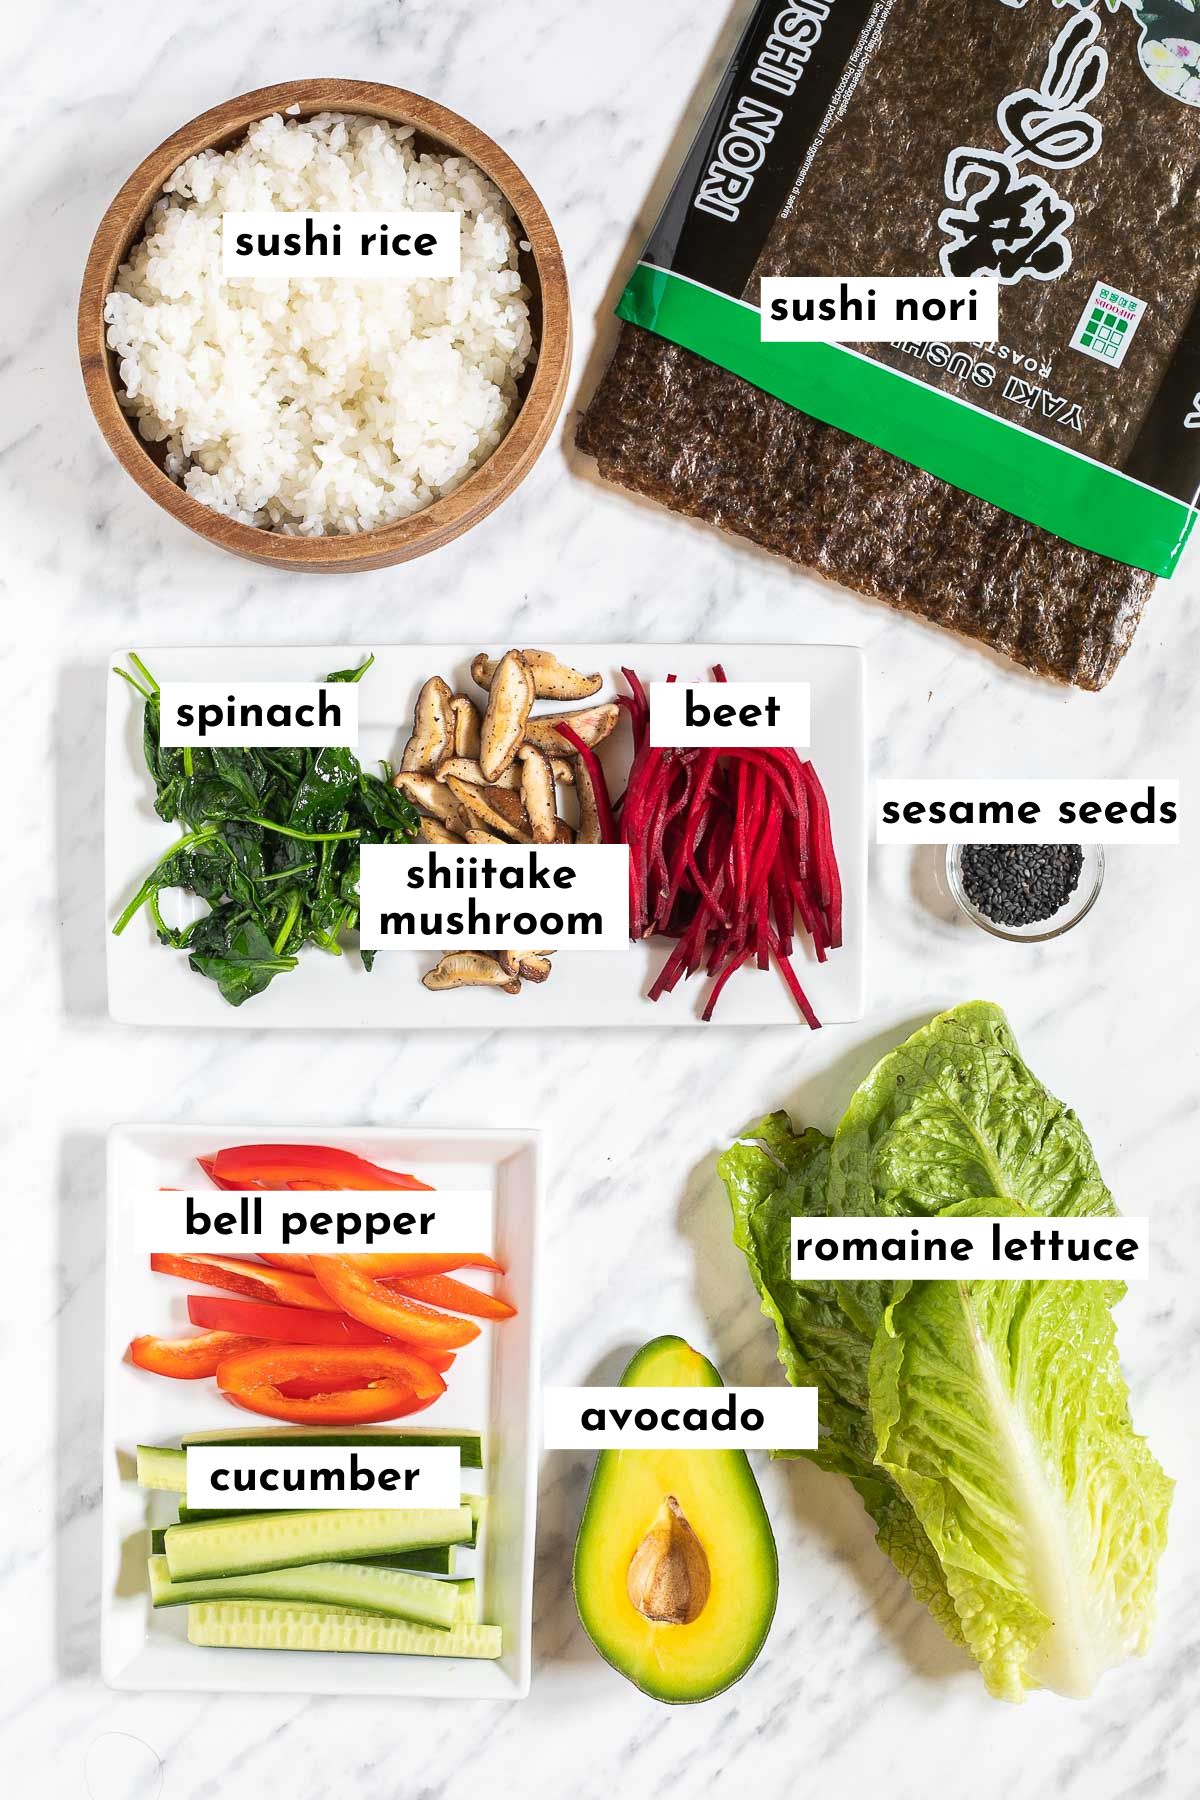 The ingredients of sushi without fish is placed on small white plates like spinach, mushroom, beet slices, cucumber, red pepper strips, half avocado, lettuce leaves, small bowl of rice and nori sheets.  